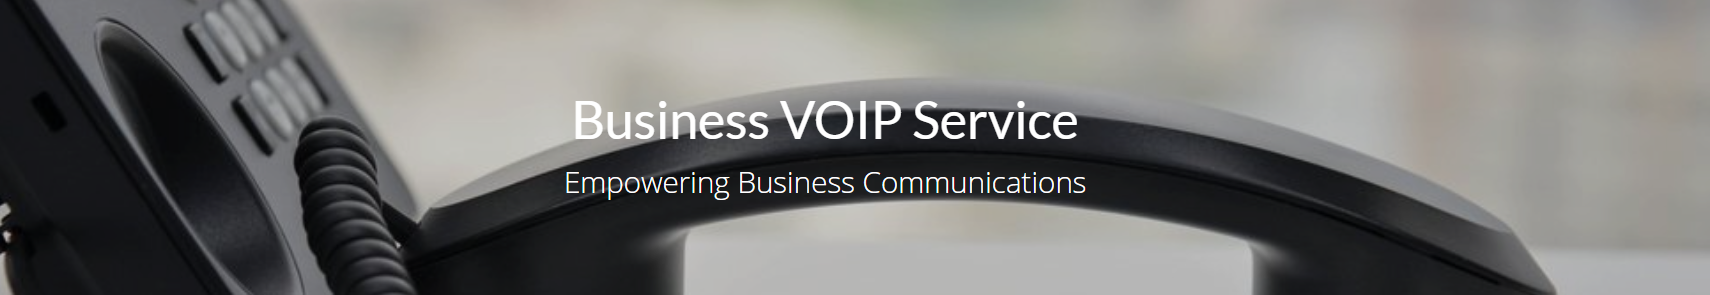 Business VoIP Phone Systems New York